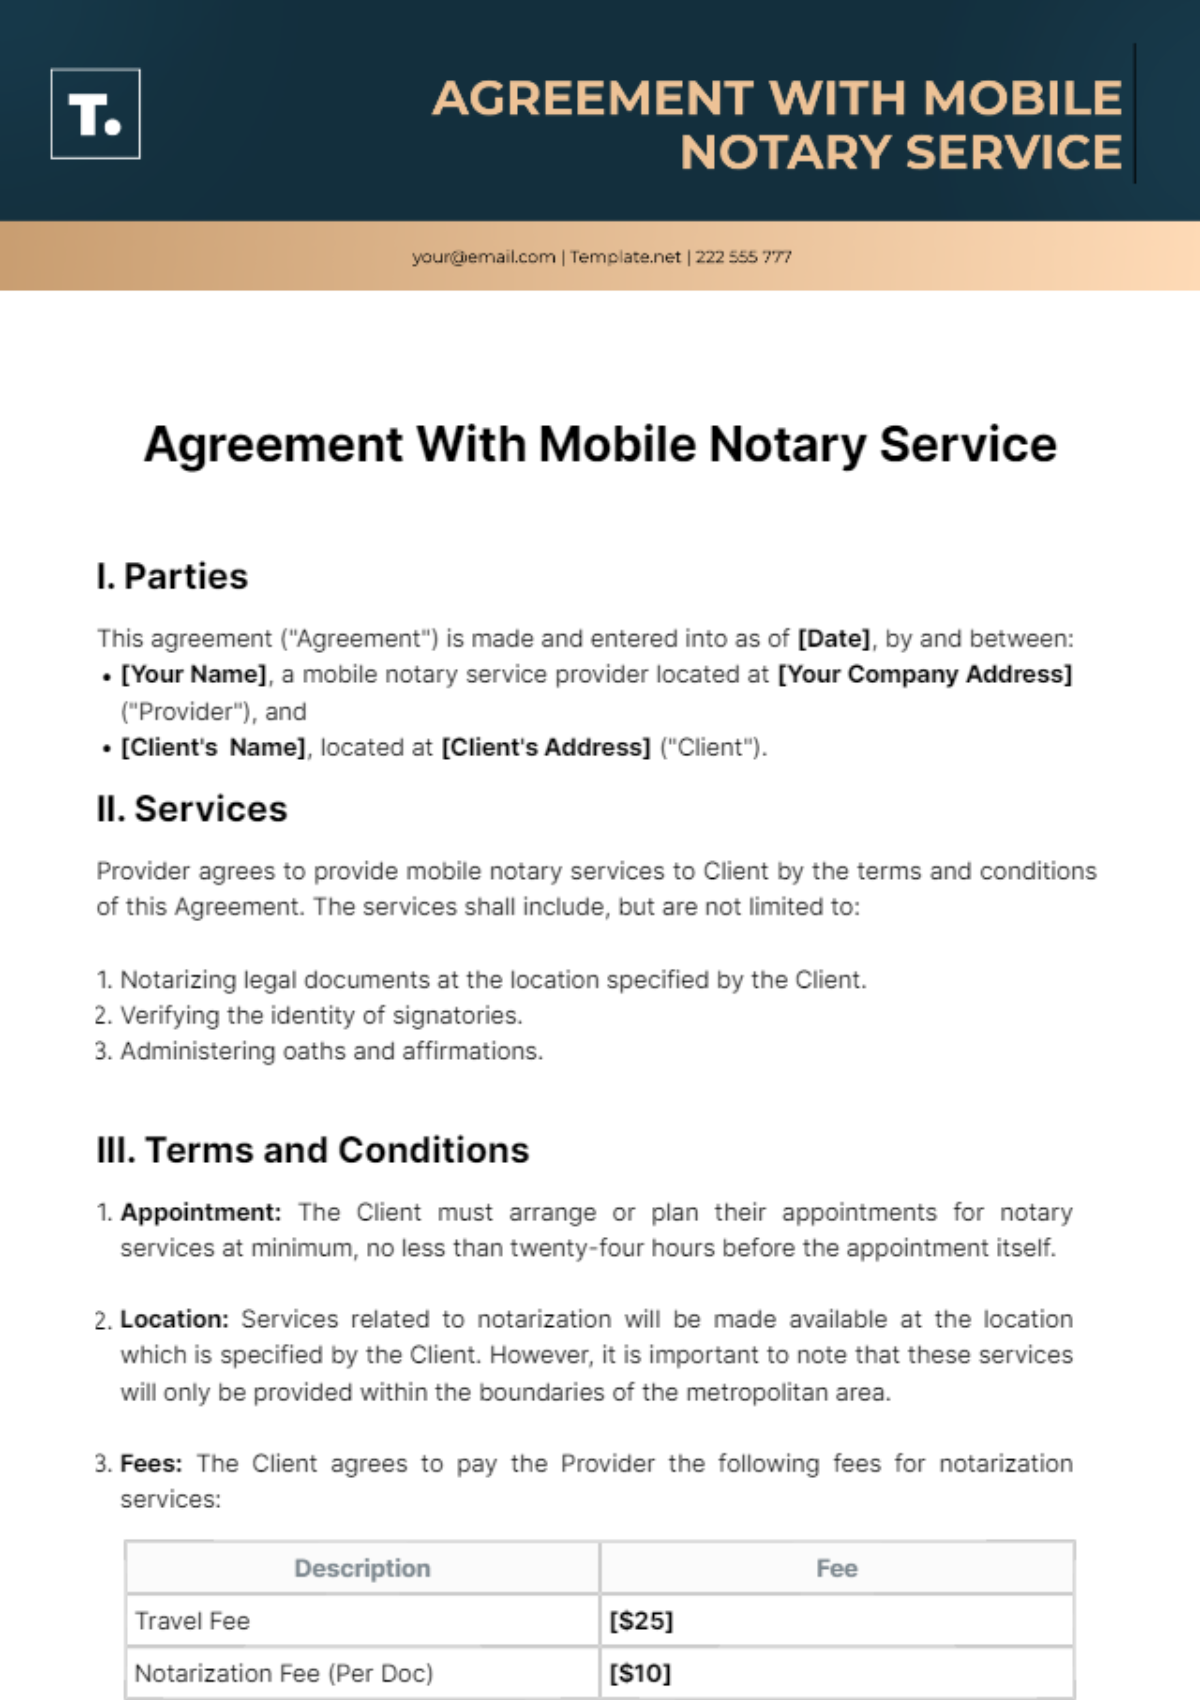 Agreement With Mobile Notary Service Template